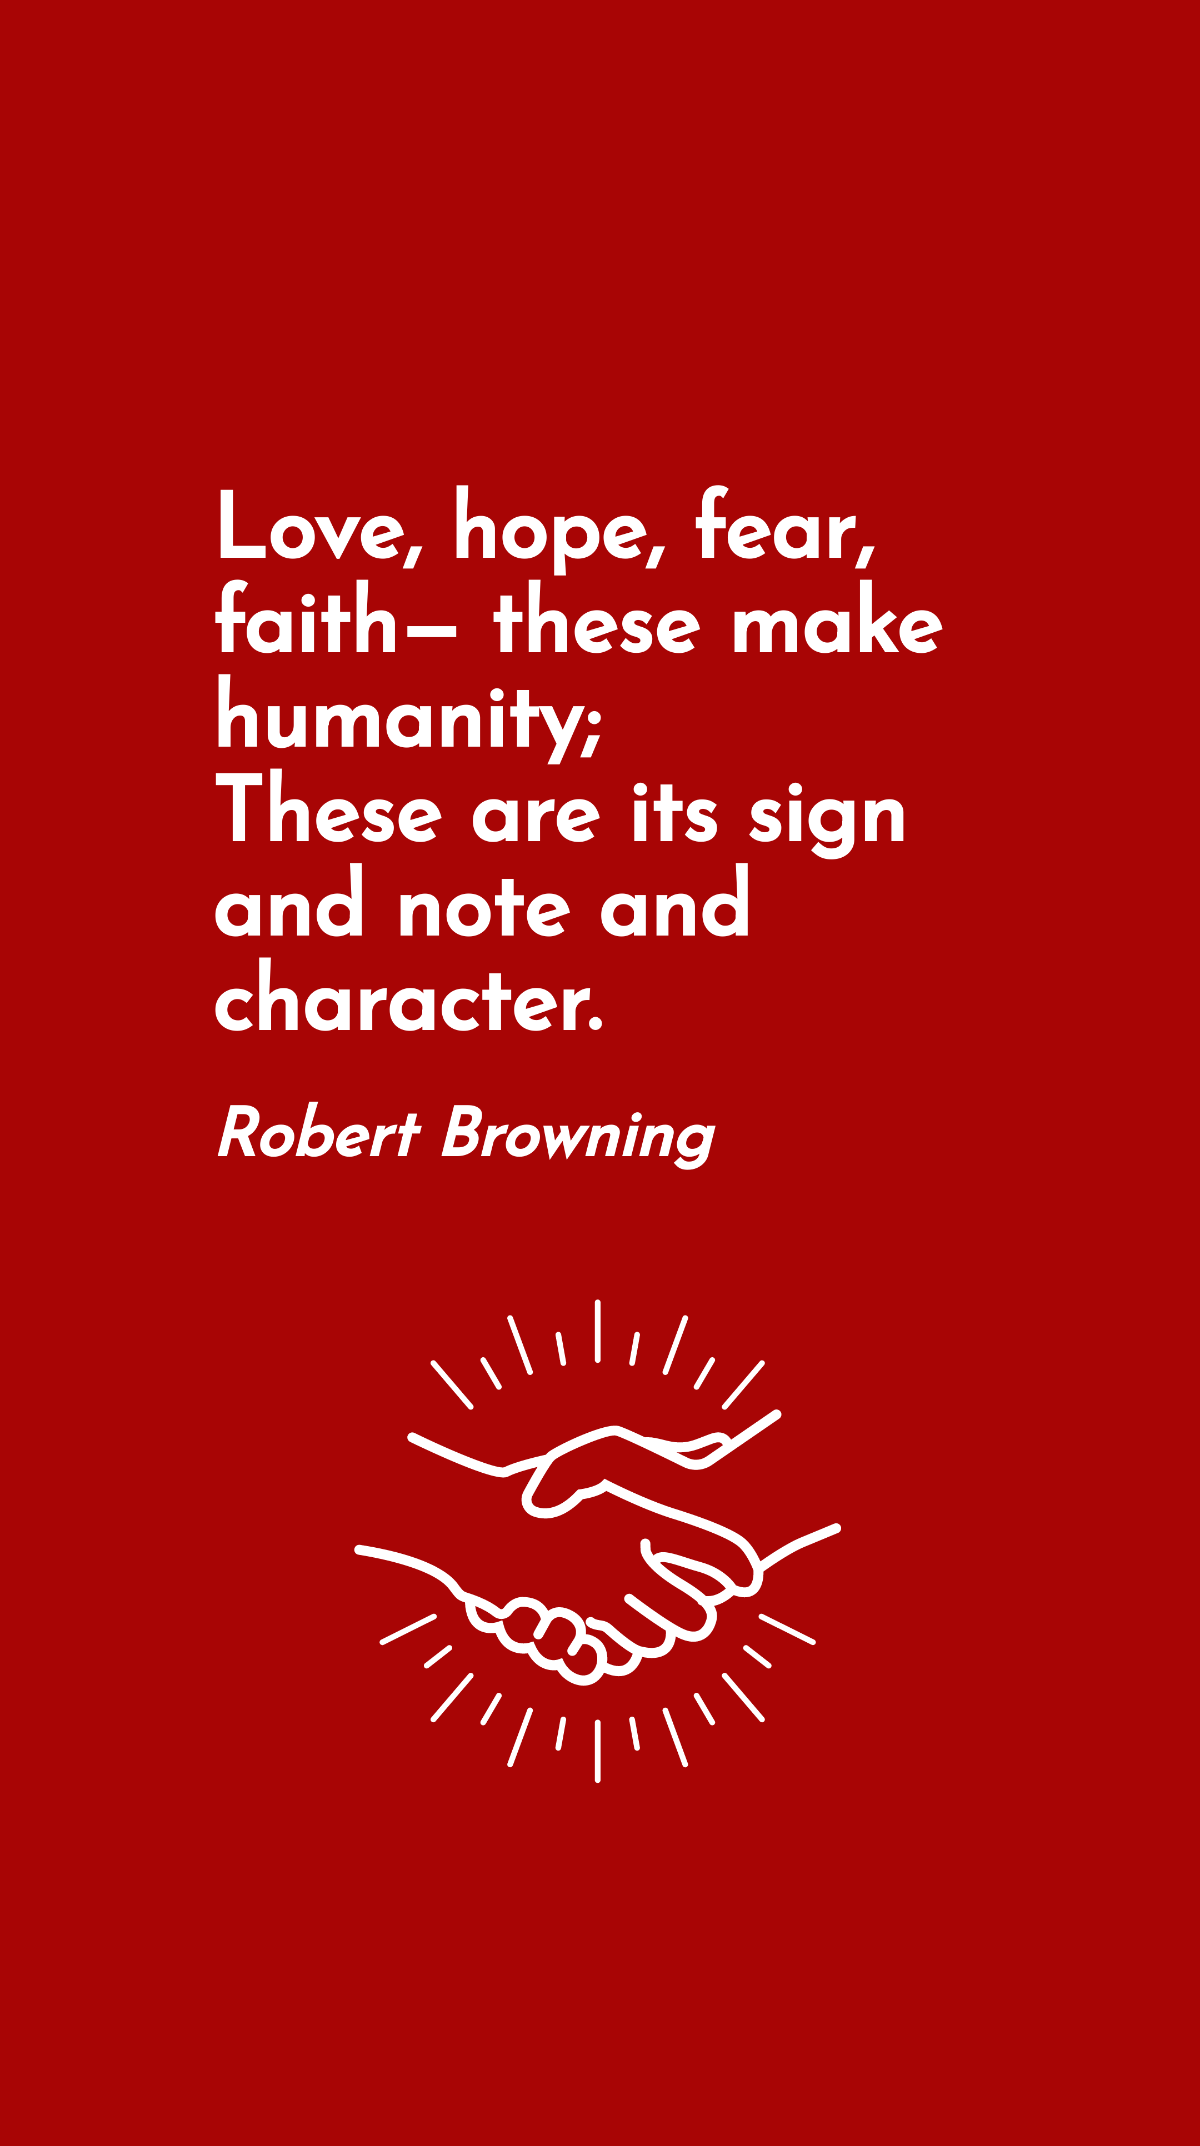 Free Robert Browning - Love, hope, fear, faith - these make humanity; These are its sign and note and character. Template